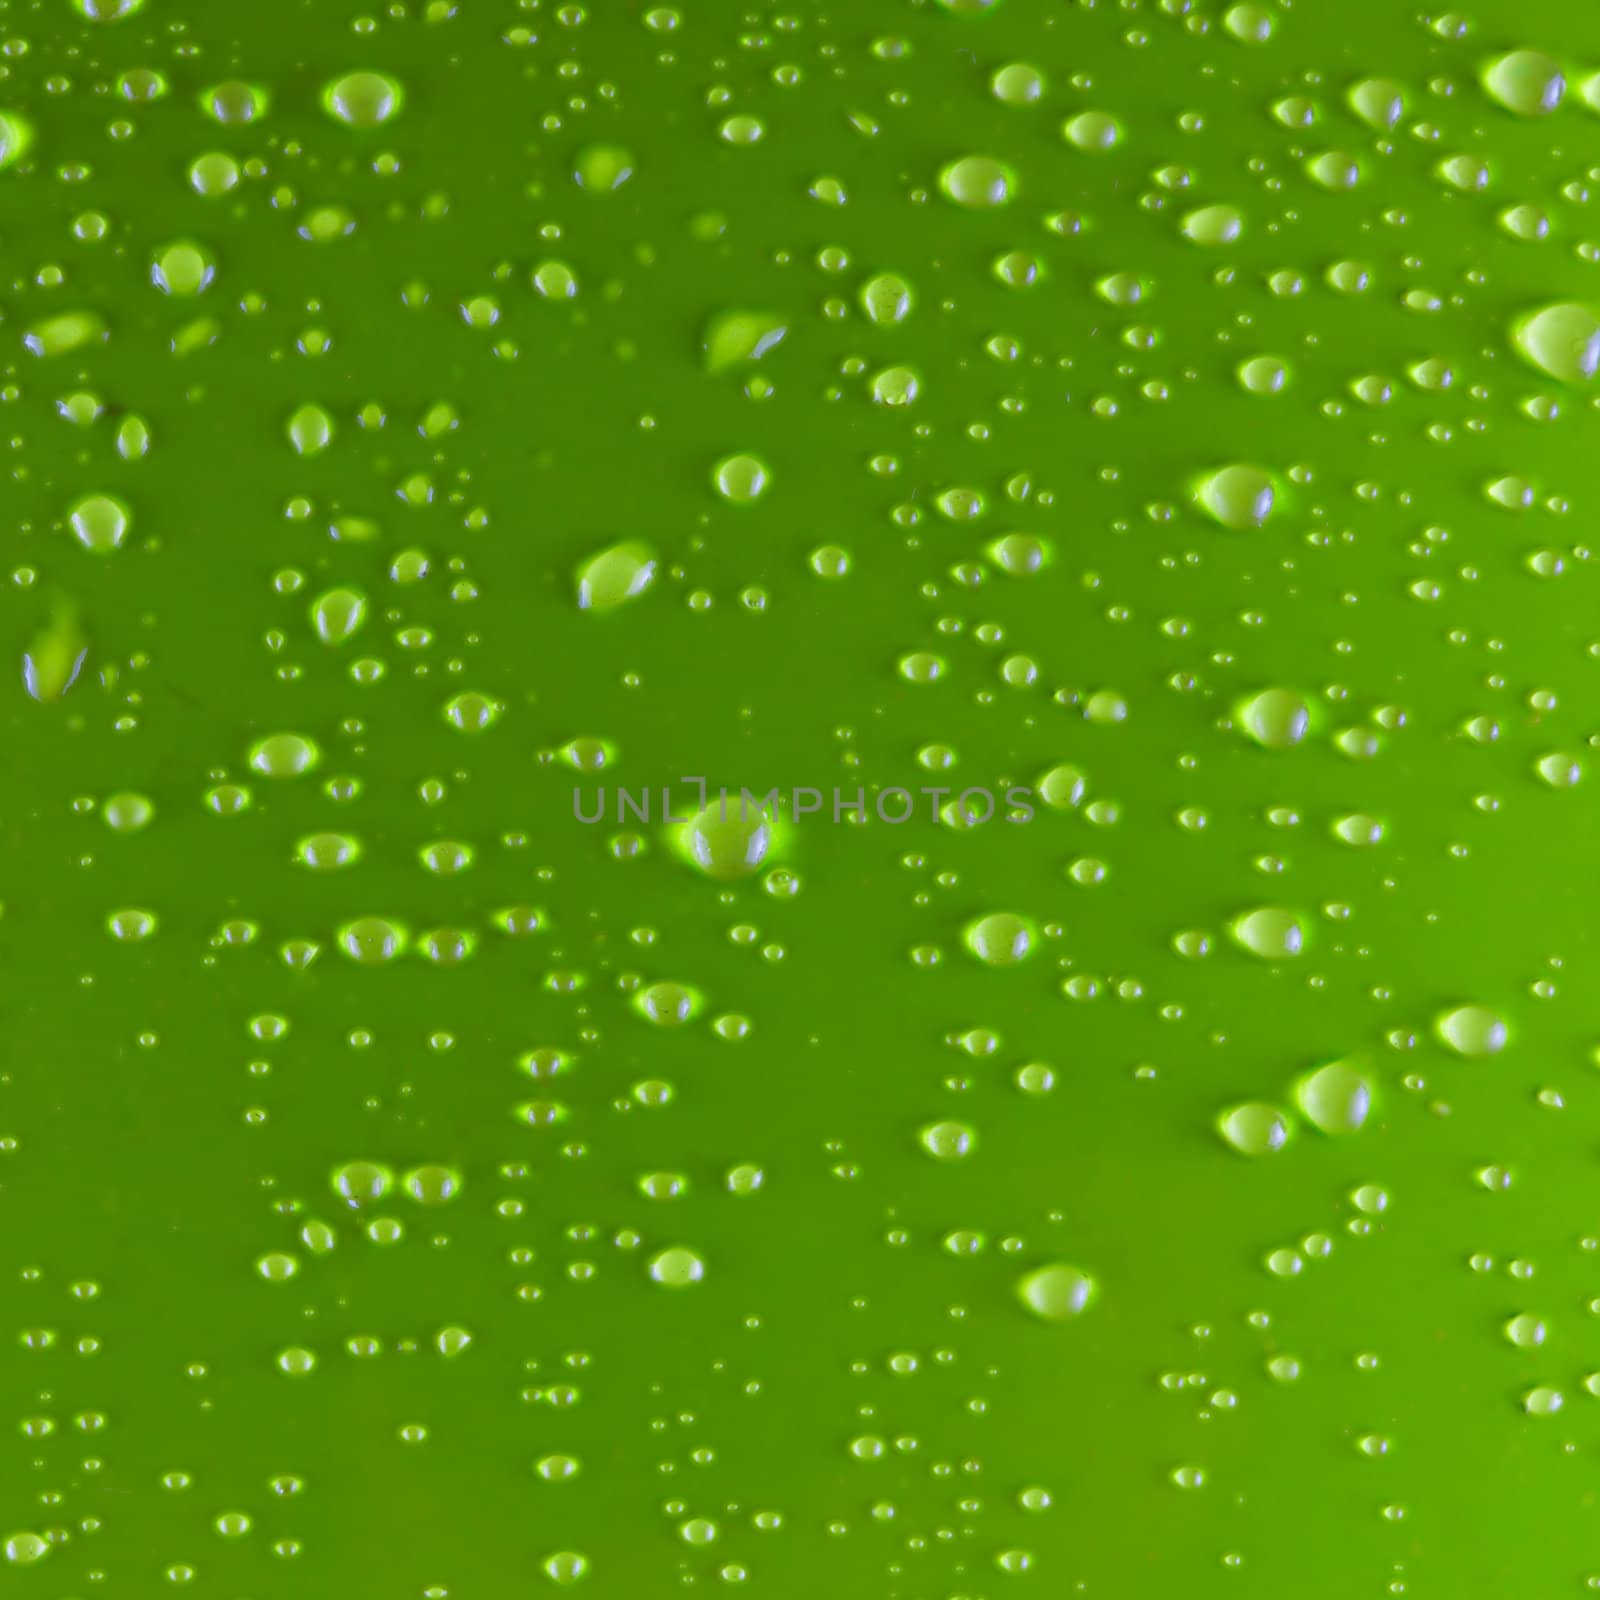 Green background full of water drops, square image